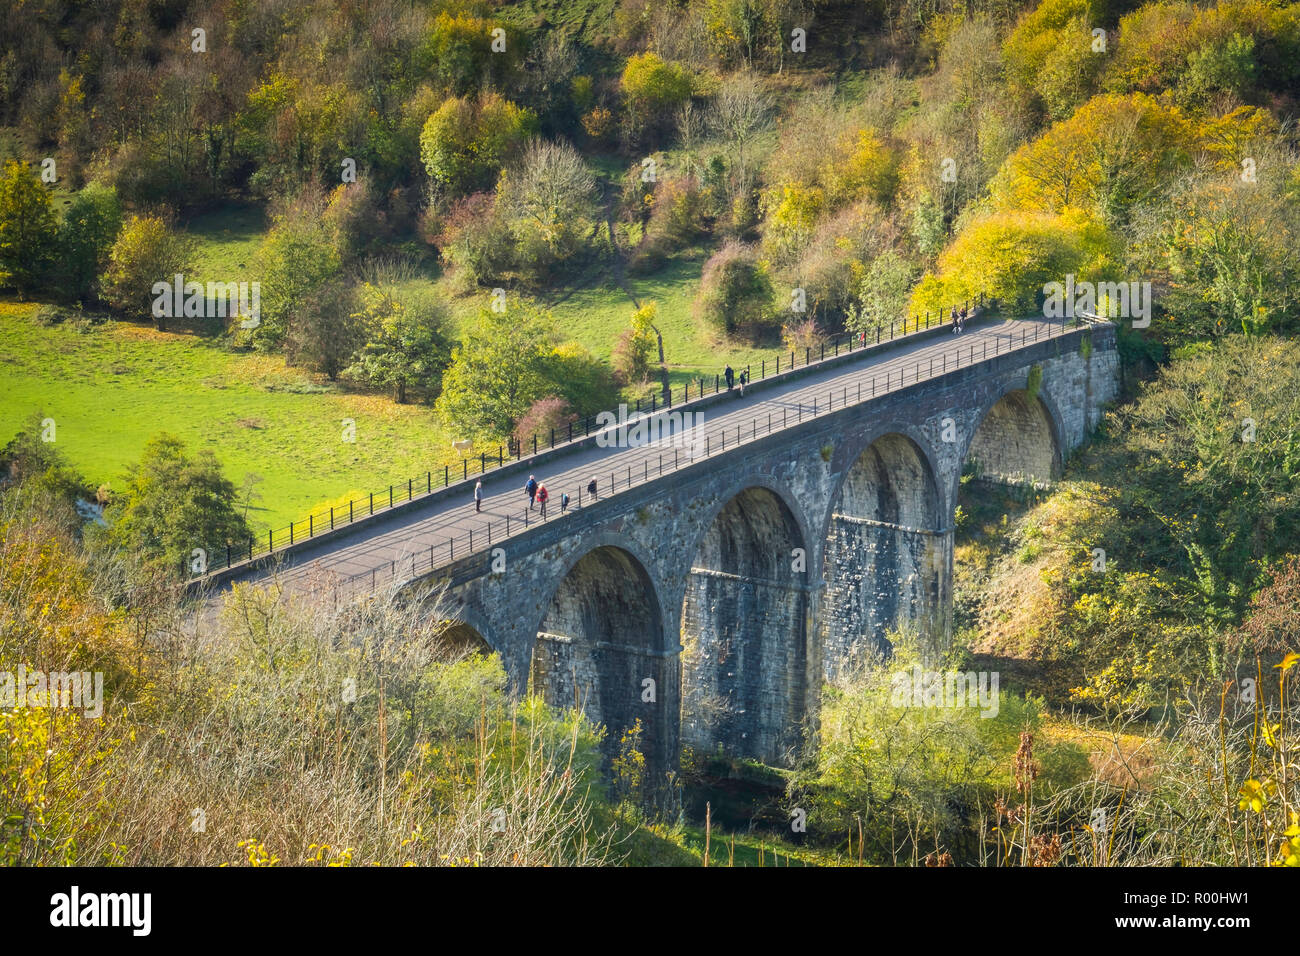 The Headstone Viaduct in Monsal Dale. Stock Photo